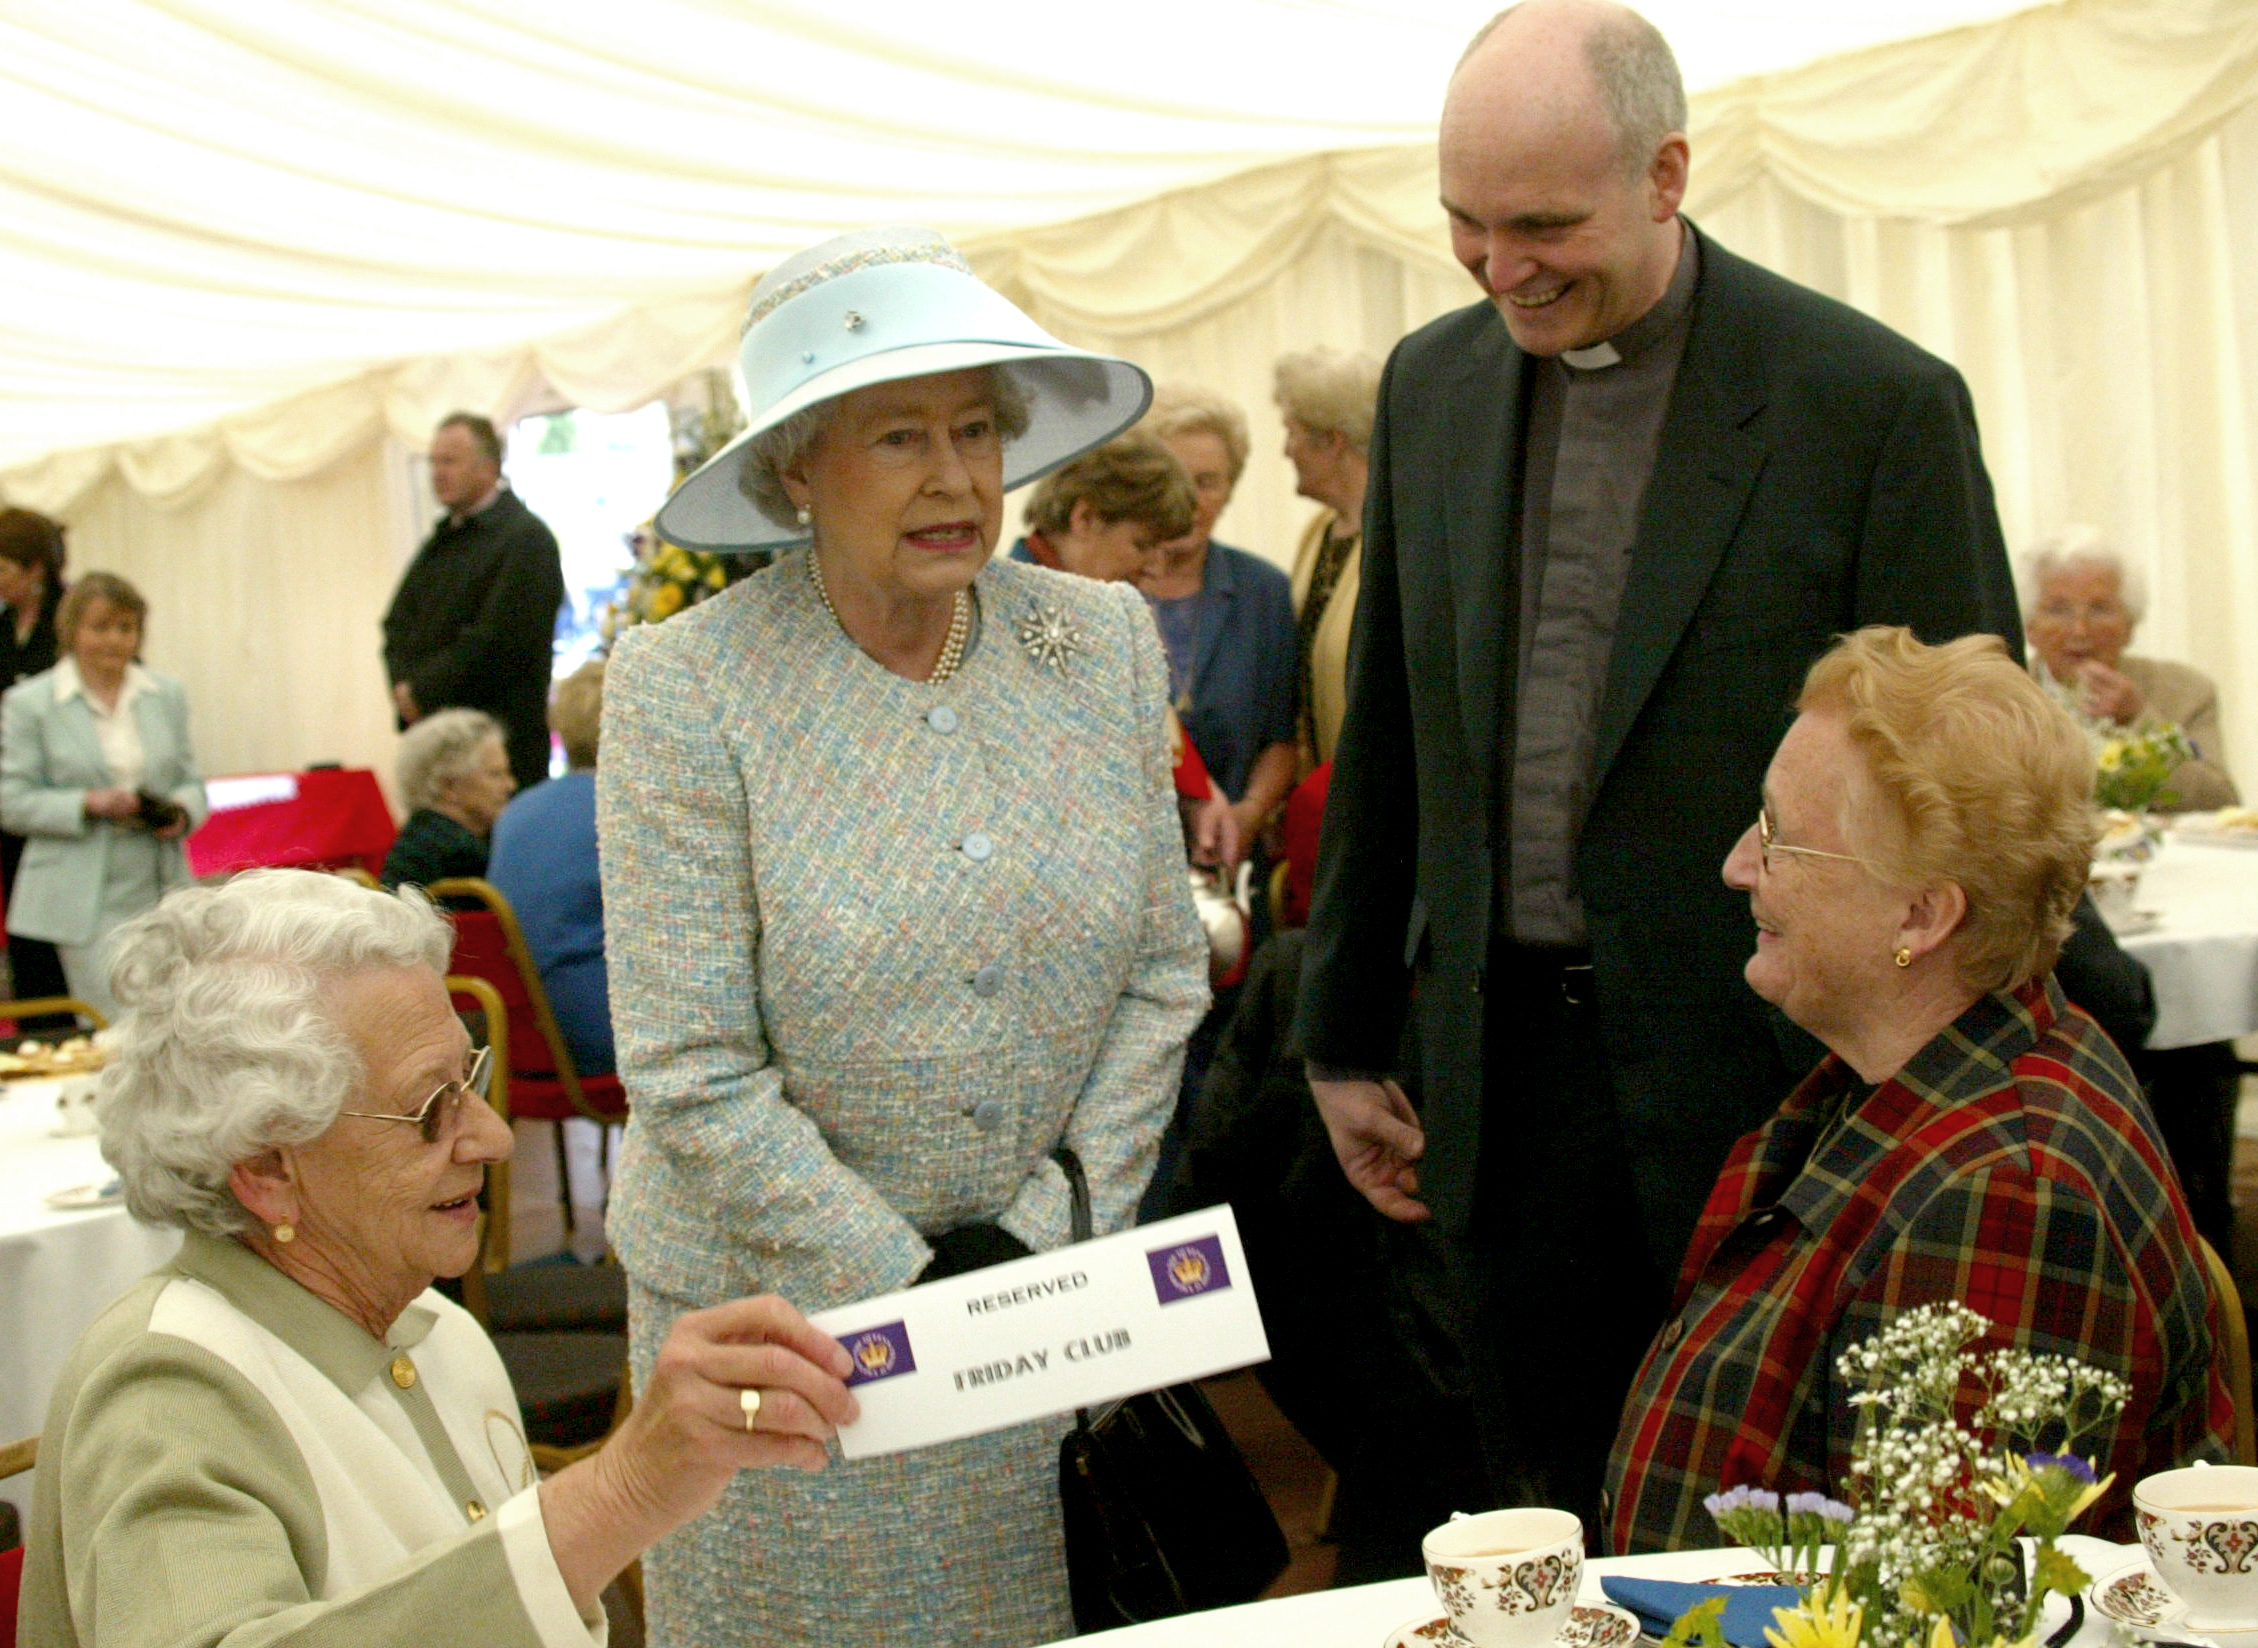 Her Majesty The Queen meeting members of the Friday Club during her visit to Ballinamallard in 2002. Photo: John McVitty.